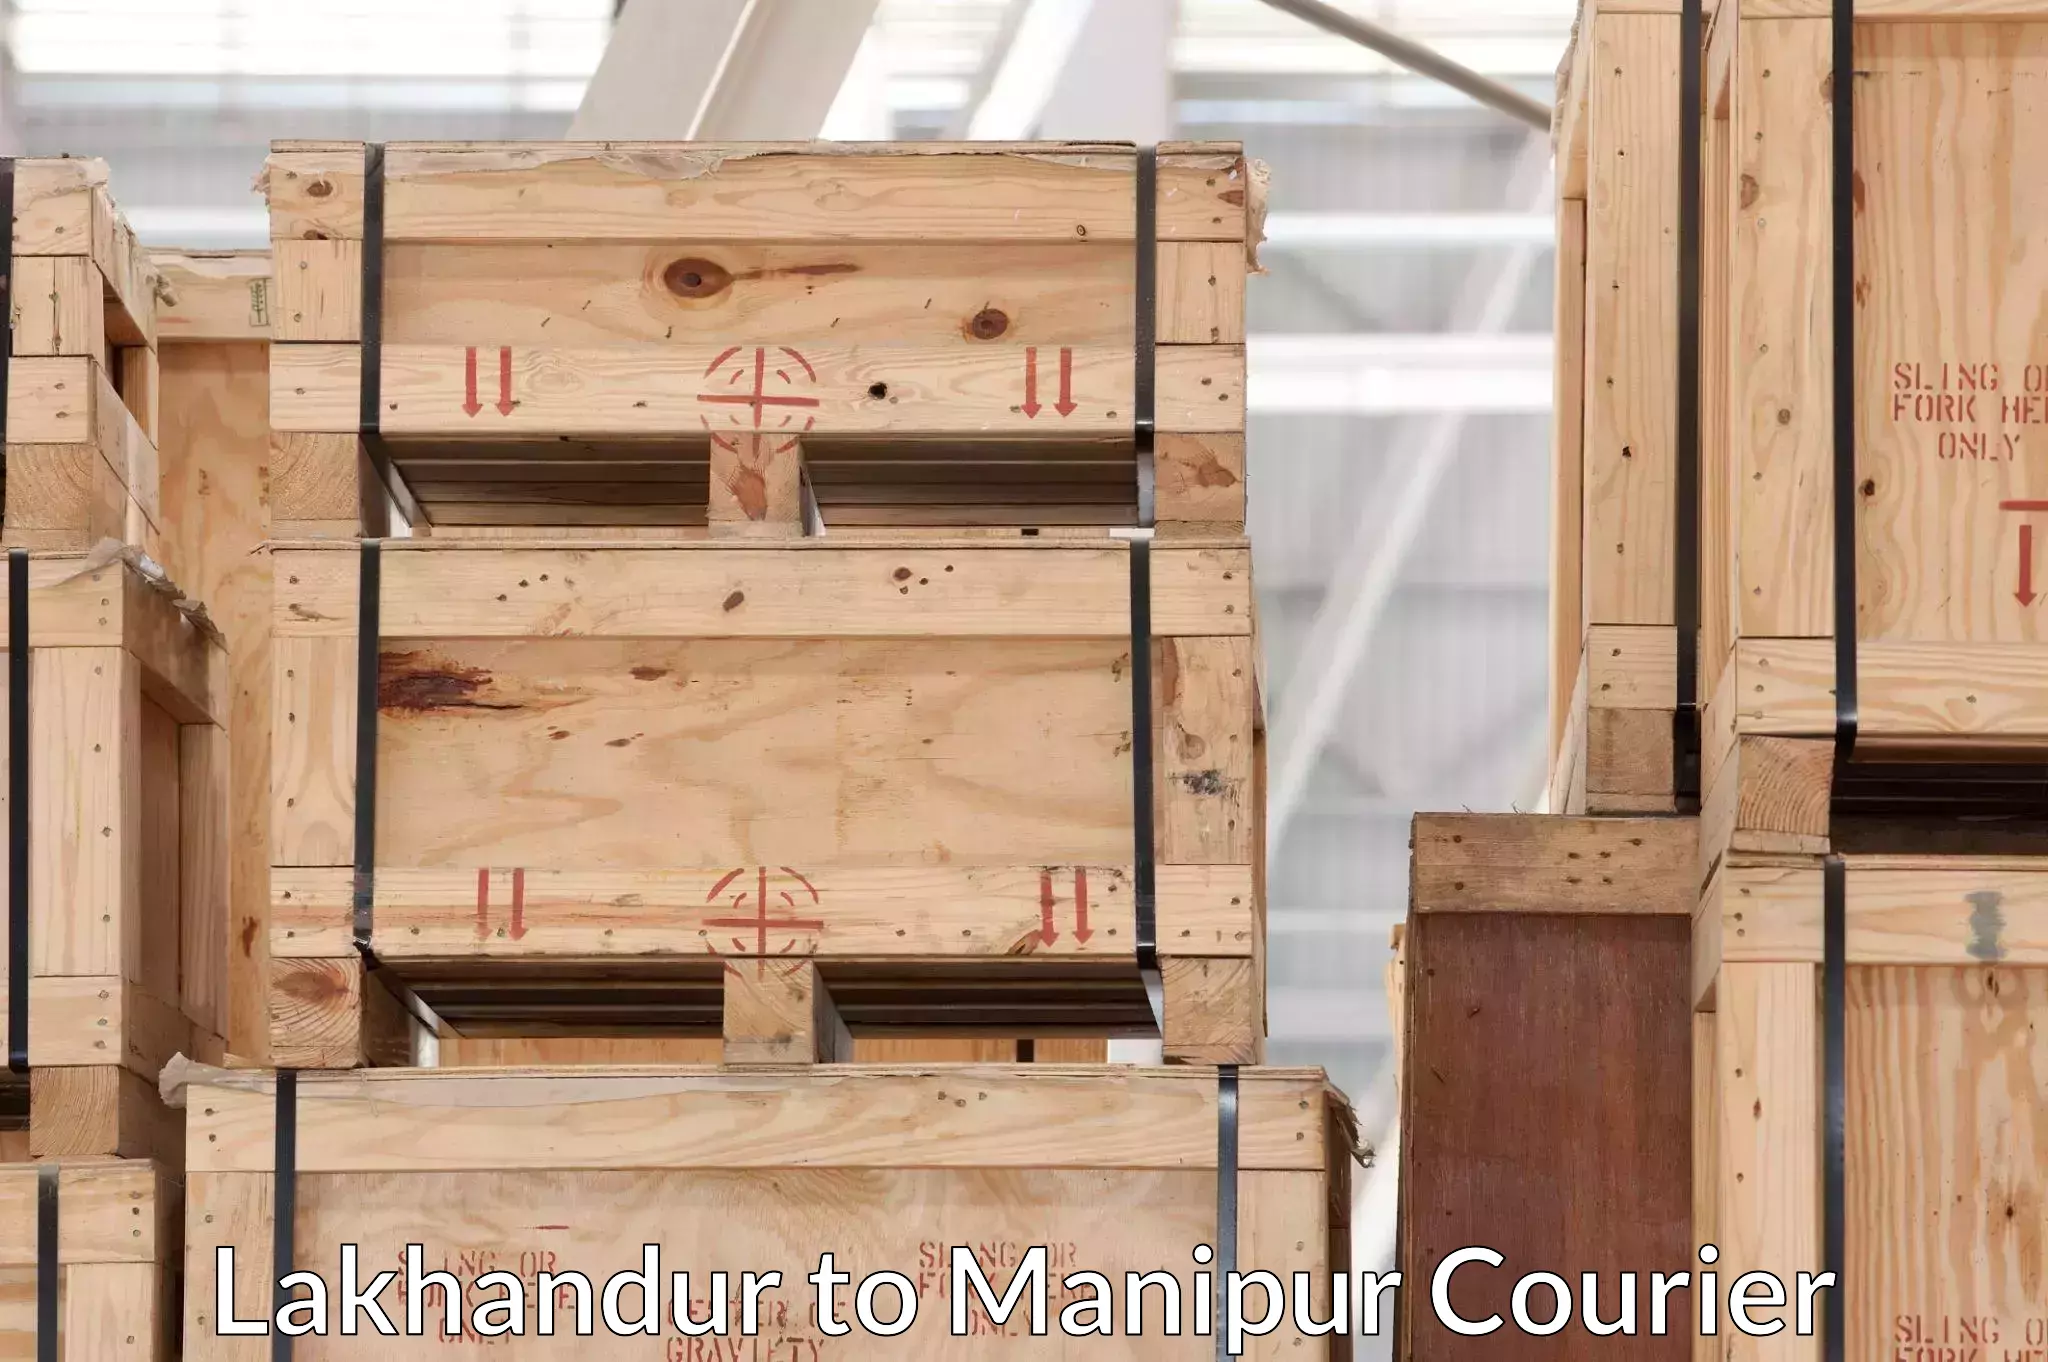 Furniture delivery service Lakhandur to Kanti